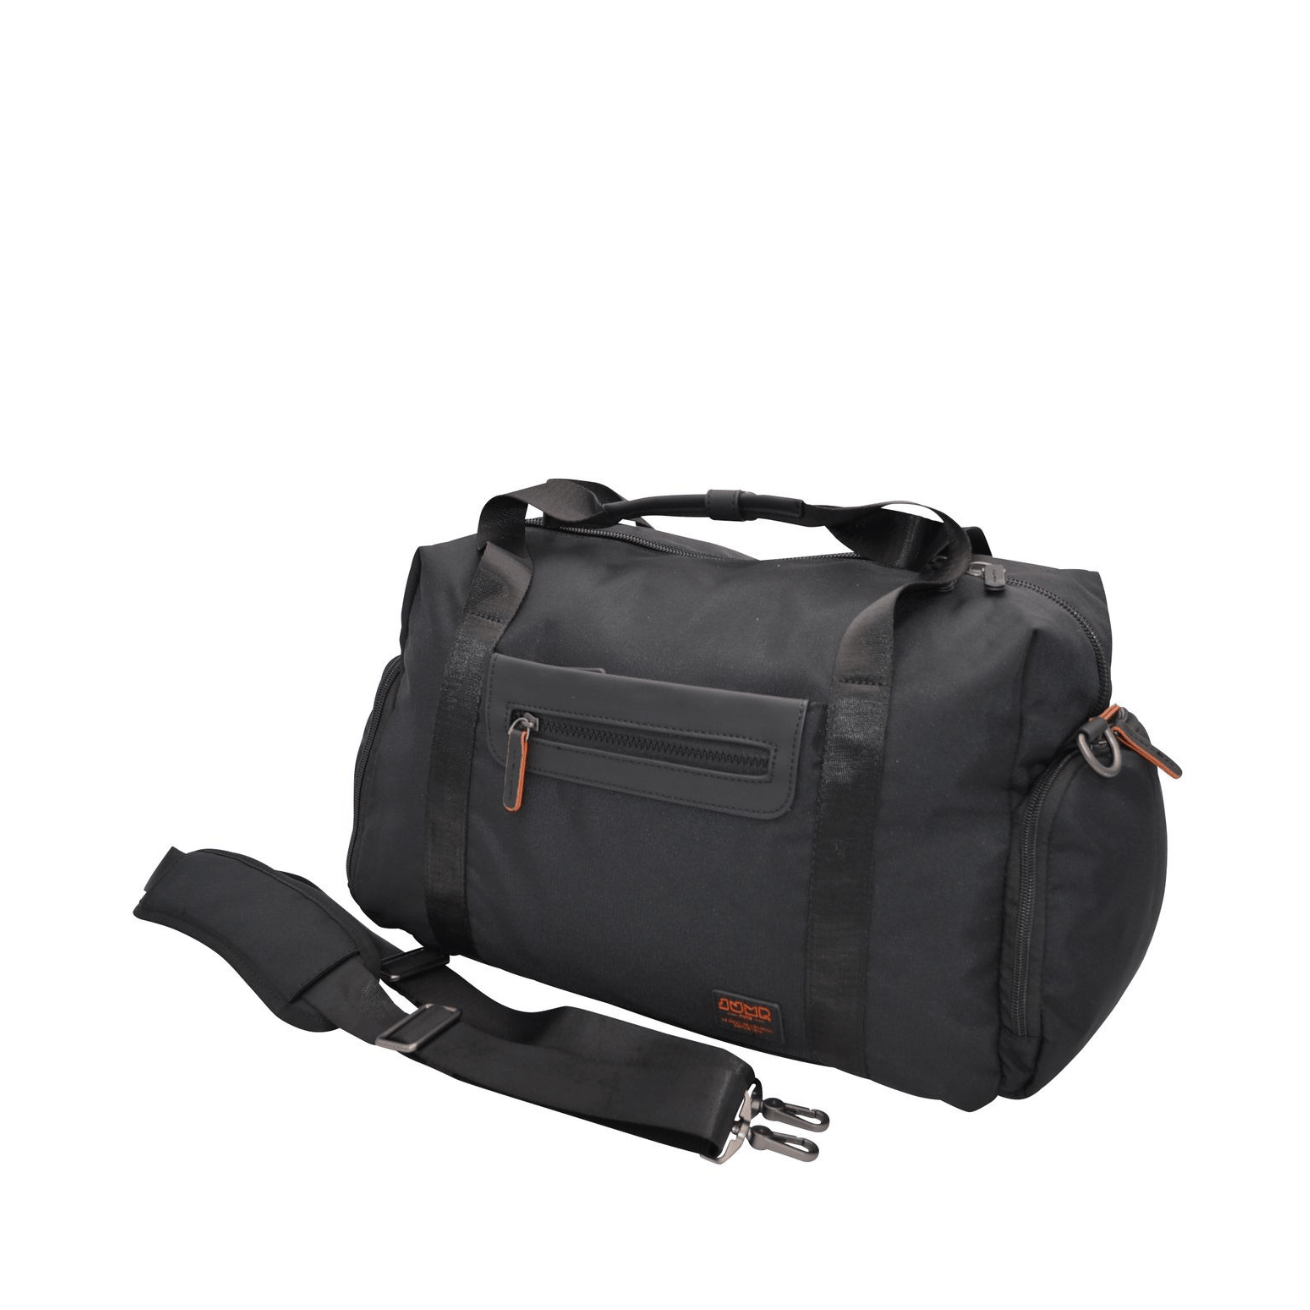 1 compartment anti-theft backpack 40 cm - laptop 15.6"